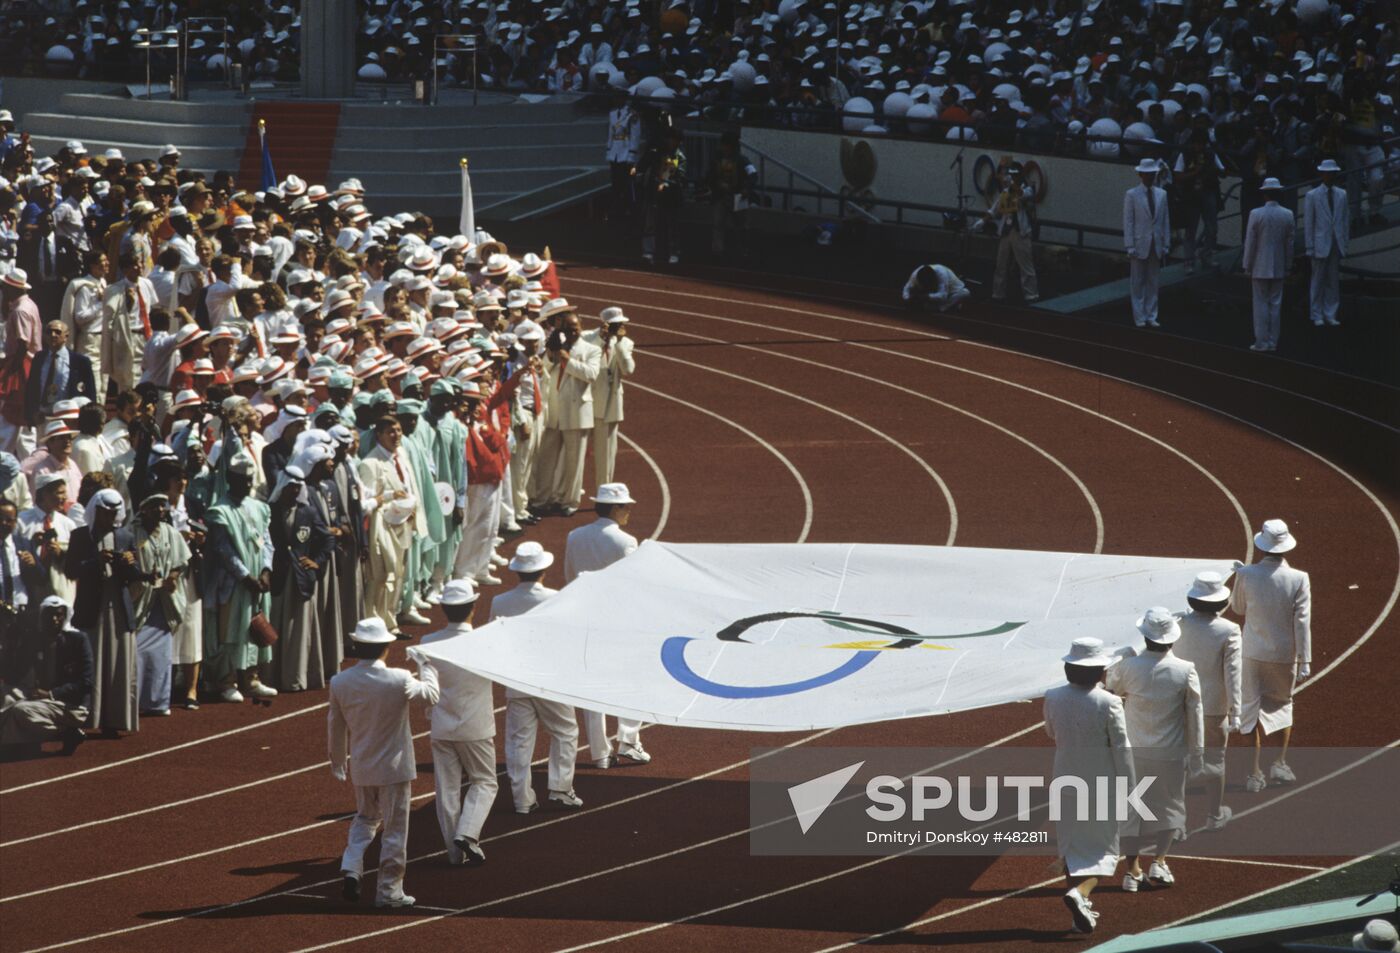 Seoul Olympic Games opening ceremony